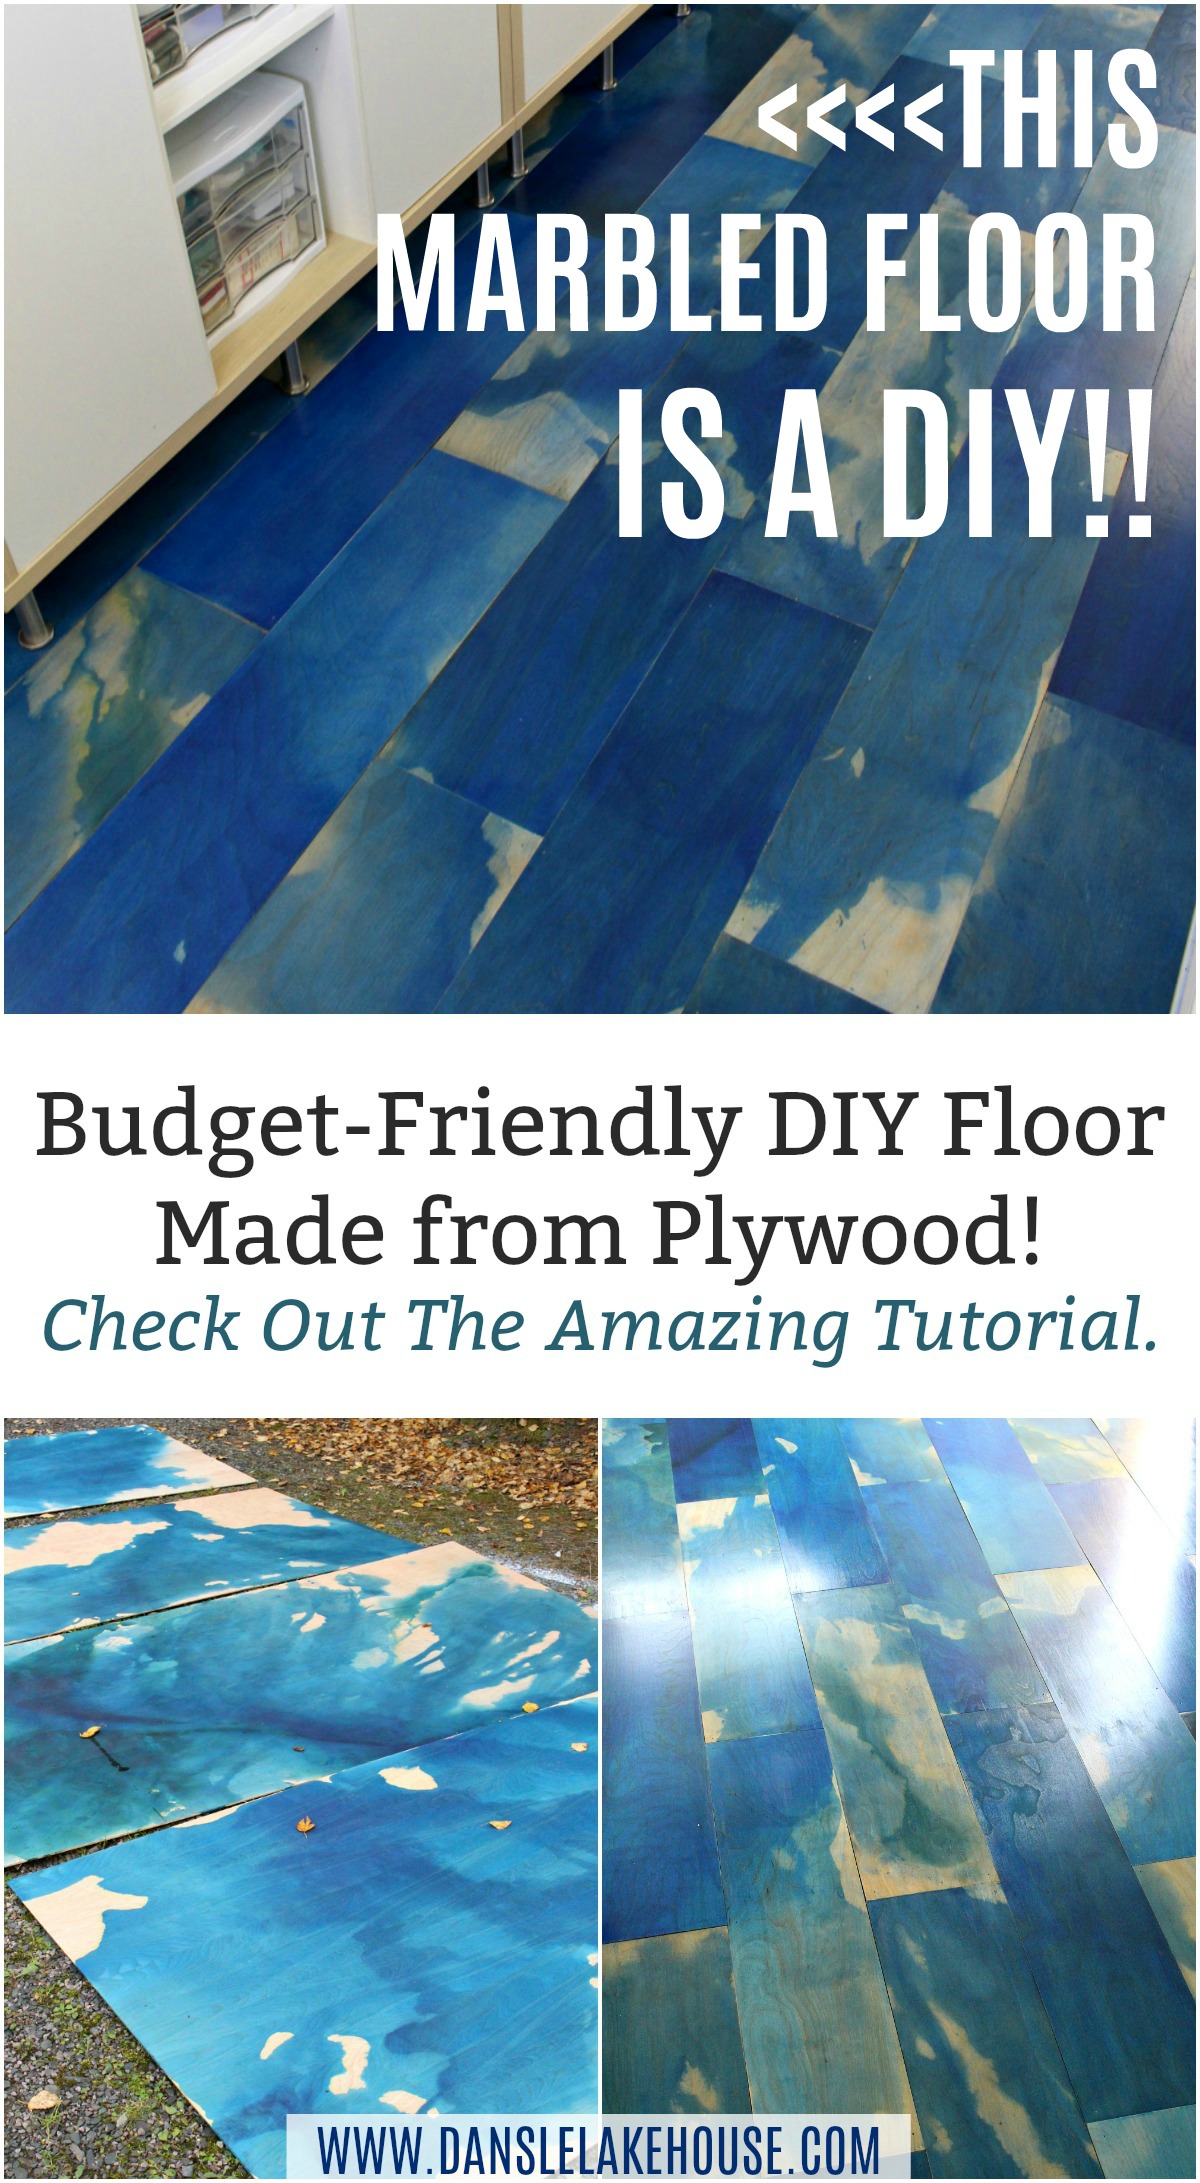 Learn how to make this AMAZINGLY COOL DIY Plywood Floor Using a Special Marbling Technique for Plywood. It's Surprisingly Easy, and a Budget Friendly Floor Idea. Make This DIY Floor in a Weekend! #diyflooring #plywood #diy #marbled #diyfloor